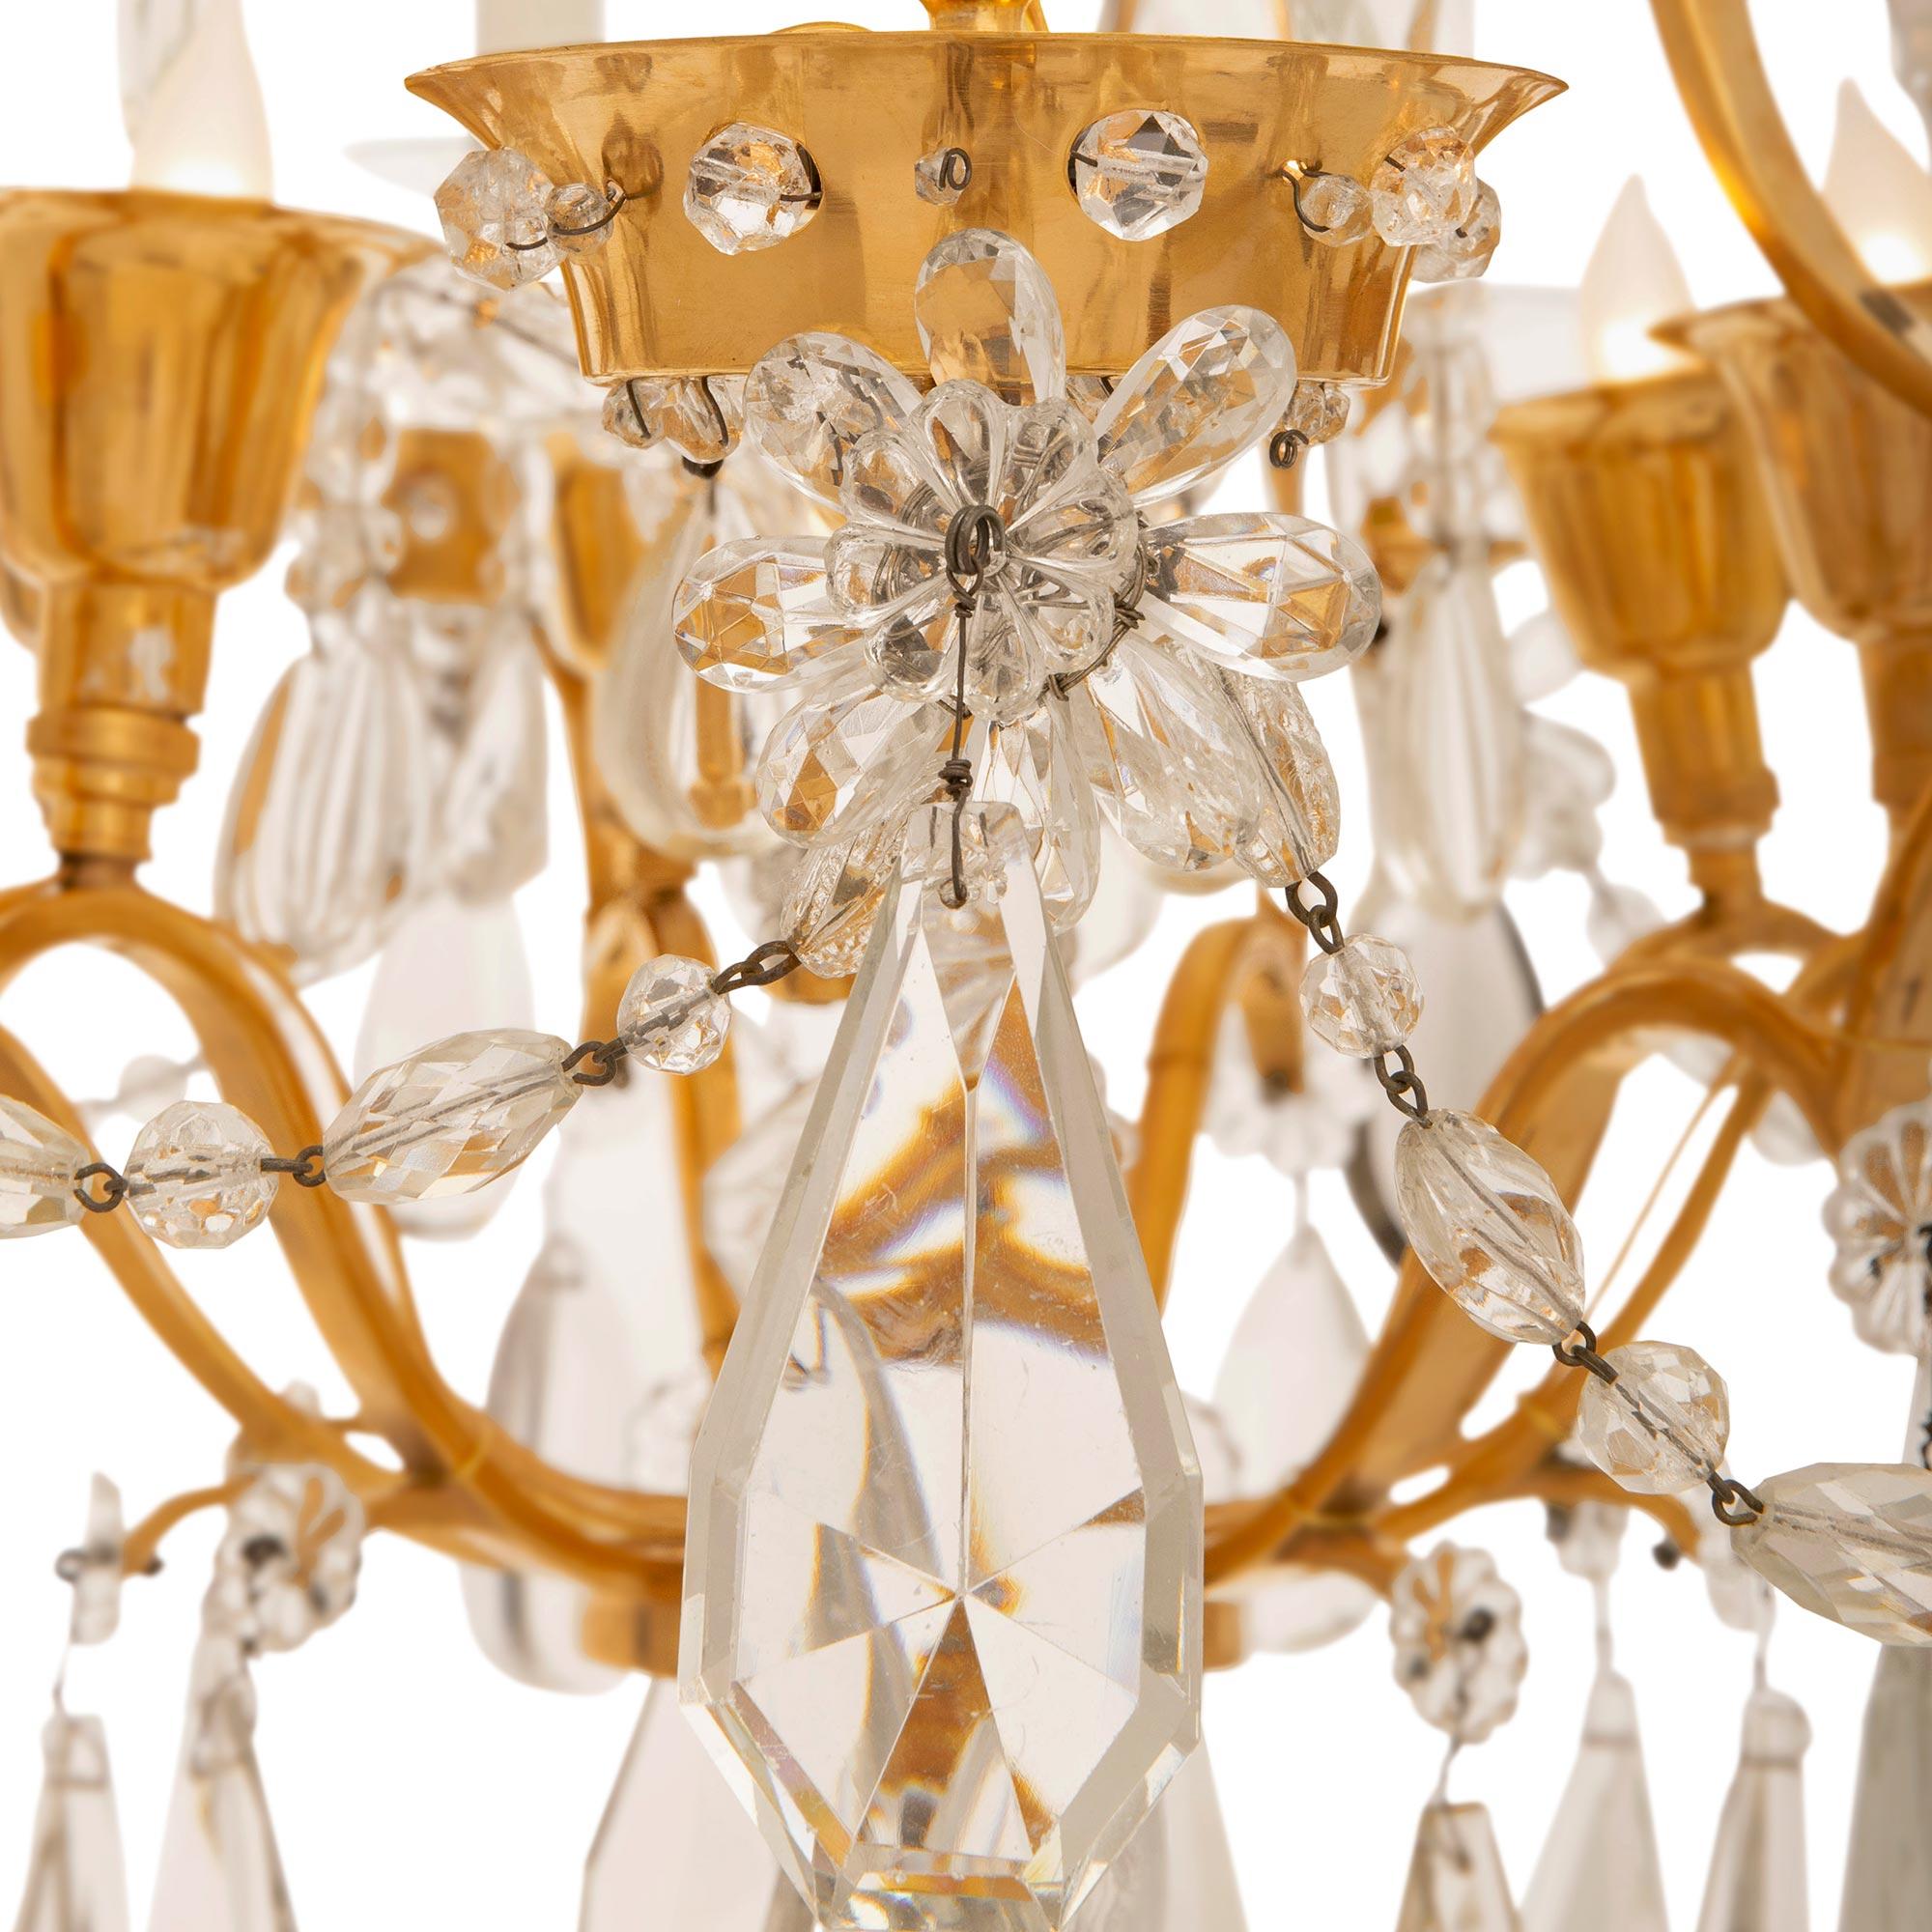 French 19th Century Louis XVI St. Bronze, Ormolu, and Crystal Chandelier For Sale 3